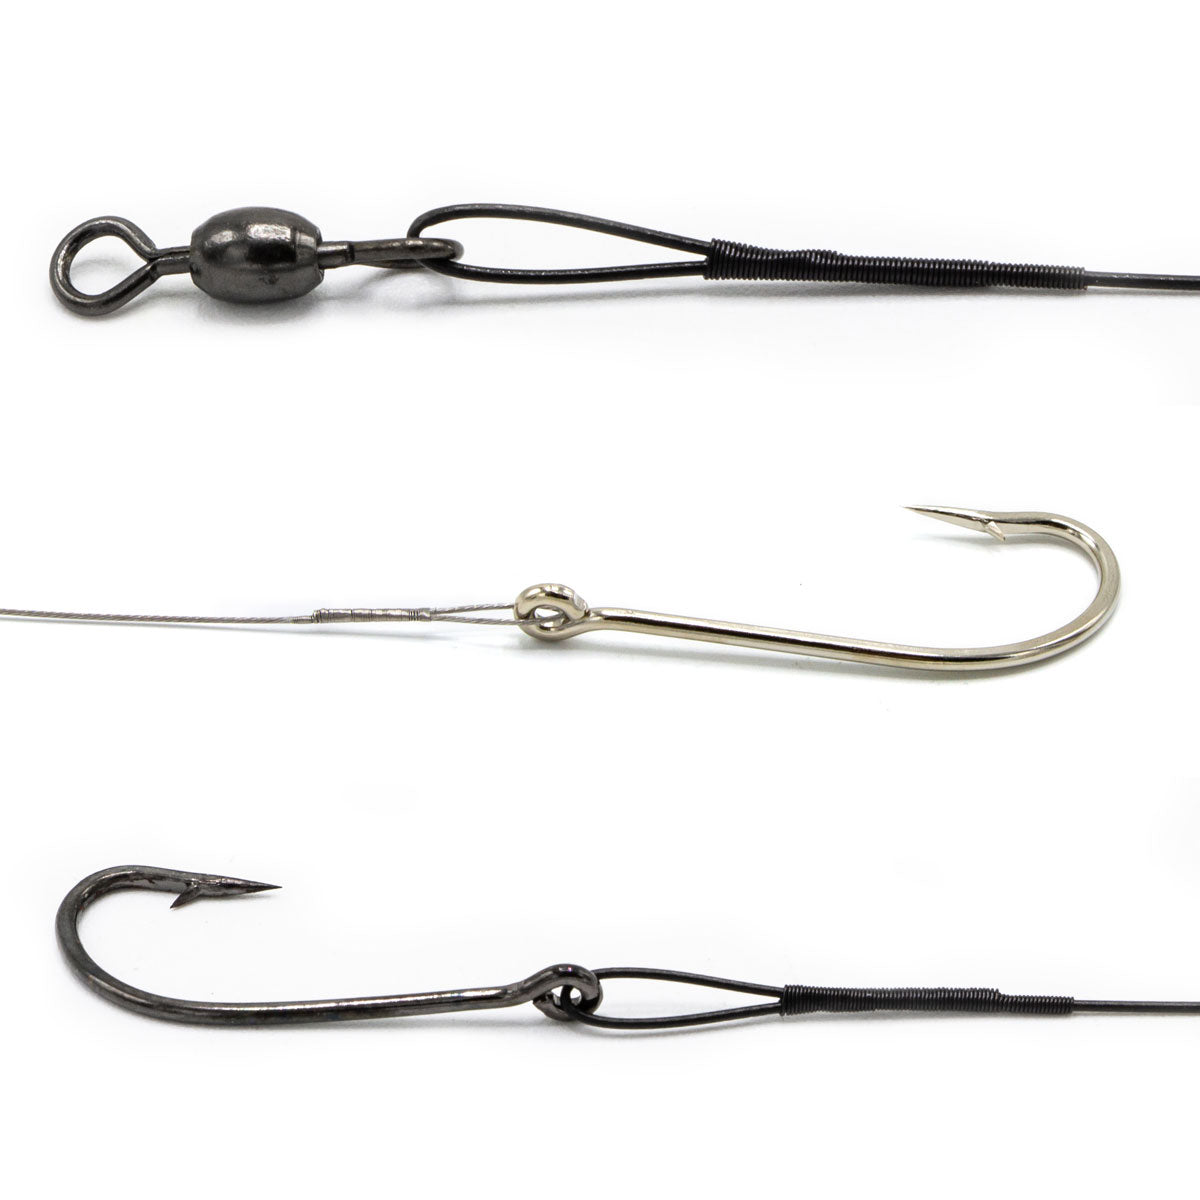 Quality, durable Fishing Hooks Wholesale for different species